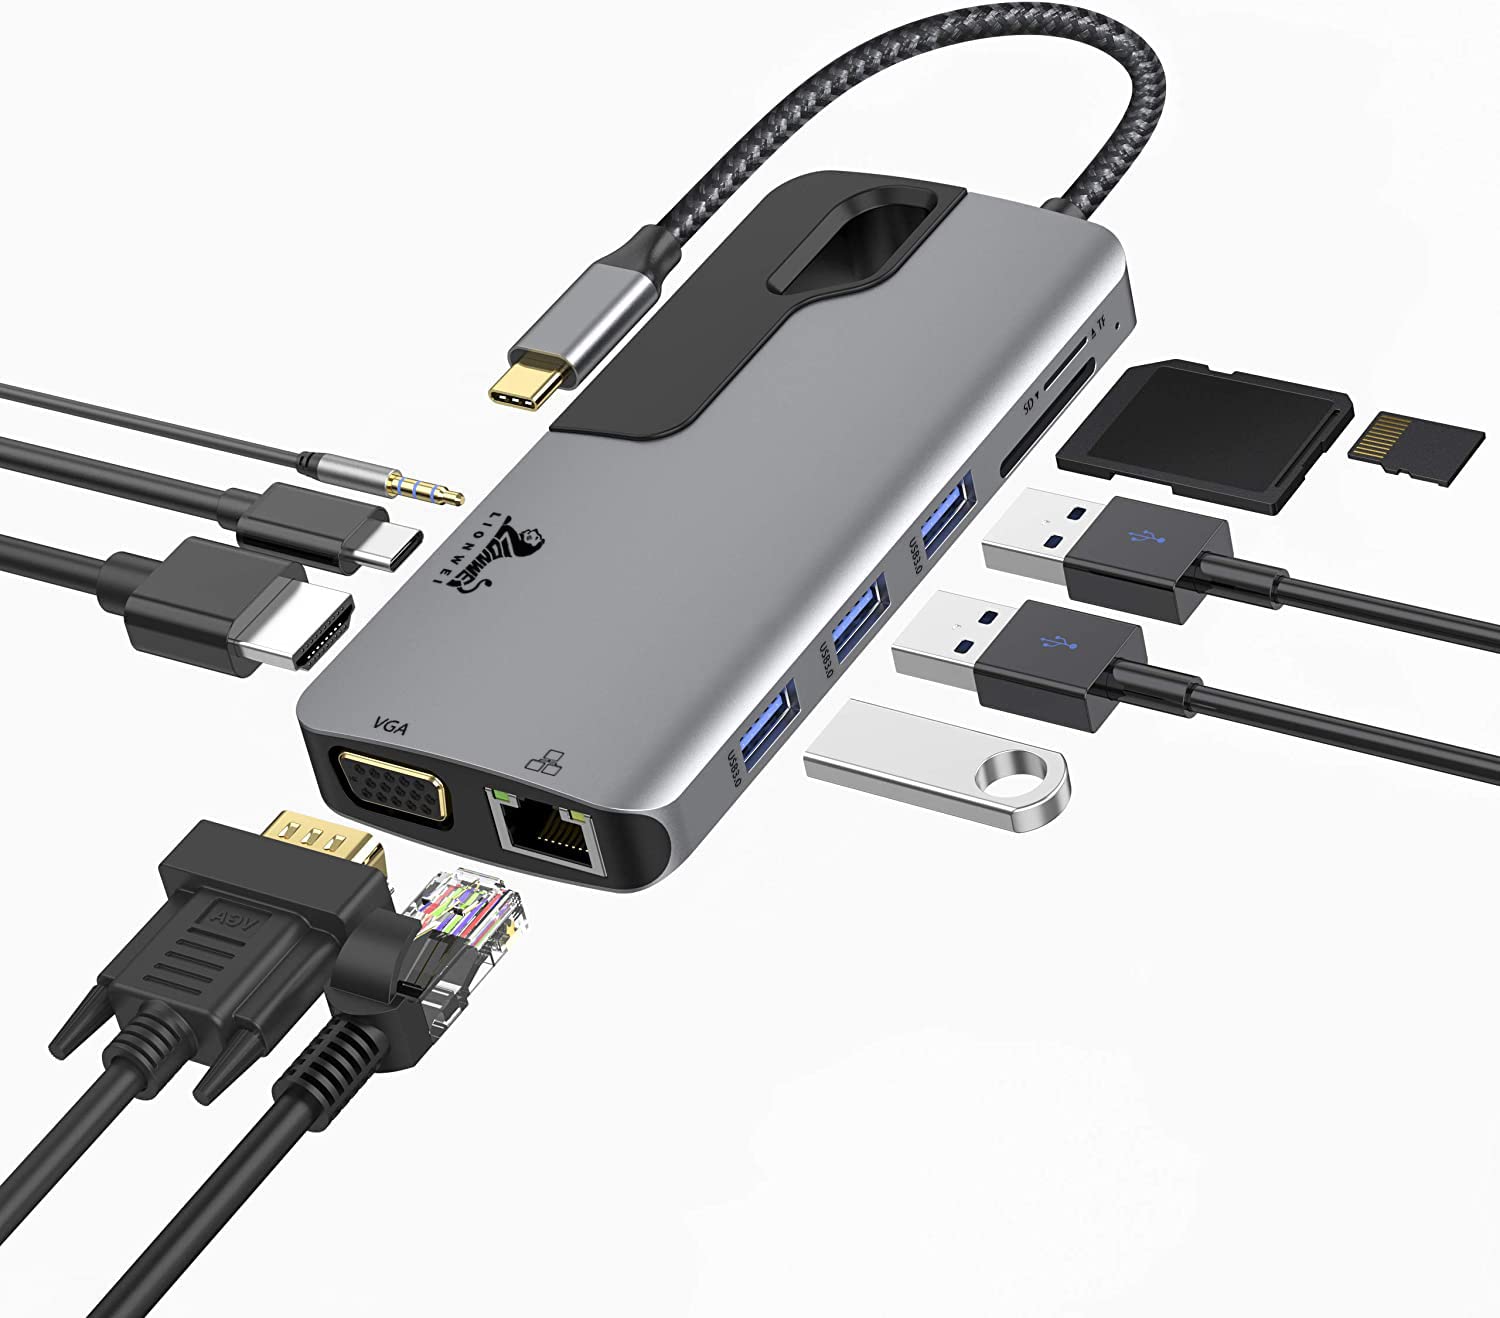 Ensure that the HDMI, Thunderbolt, or DisplayPort cable is securely connected to both the MacBook and the external display.
If using an adapter or dongle, make sure it is properly plugged into the MacBook and the cable is securely connected to the adapter.